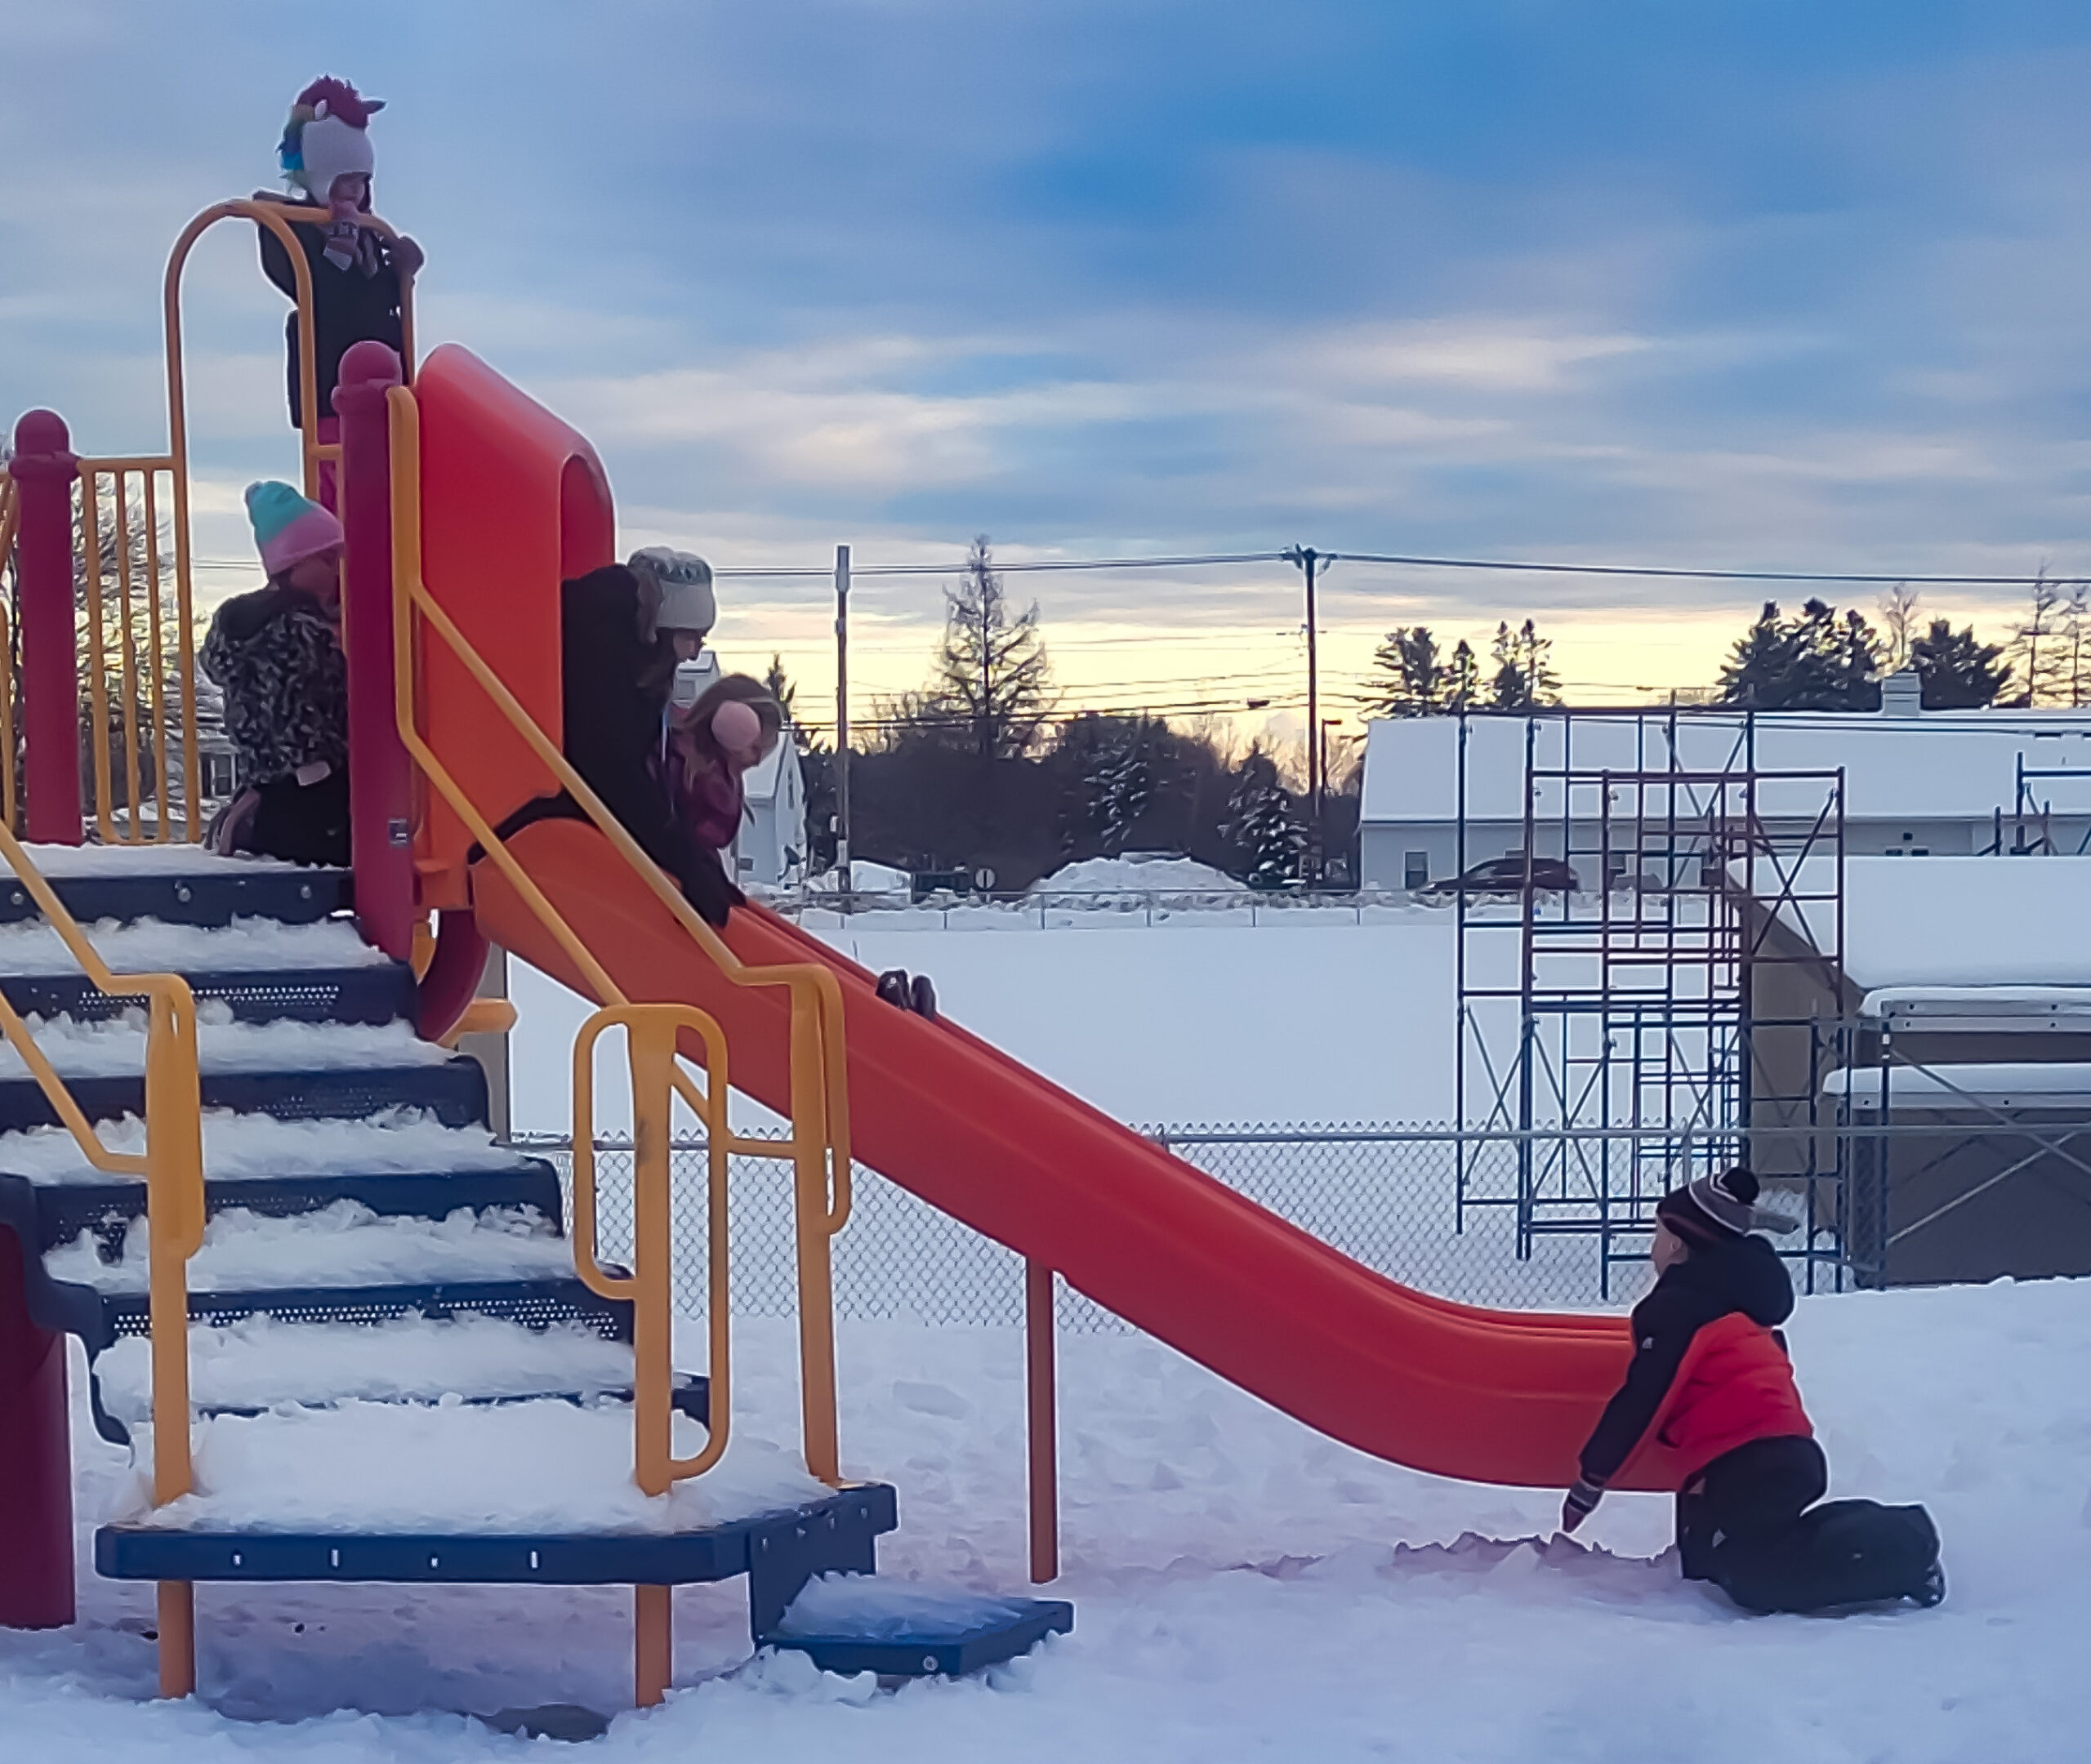 Color photo of four children playing on a snow-filled slide play structure during winter.